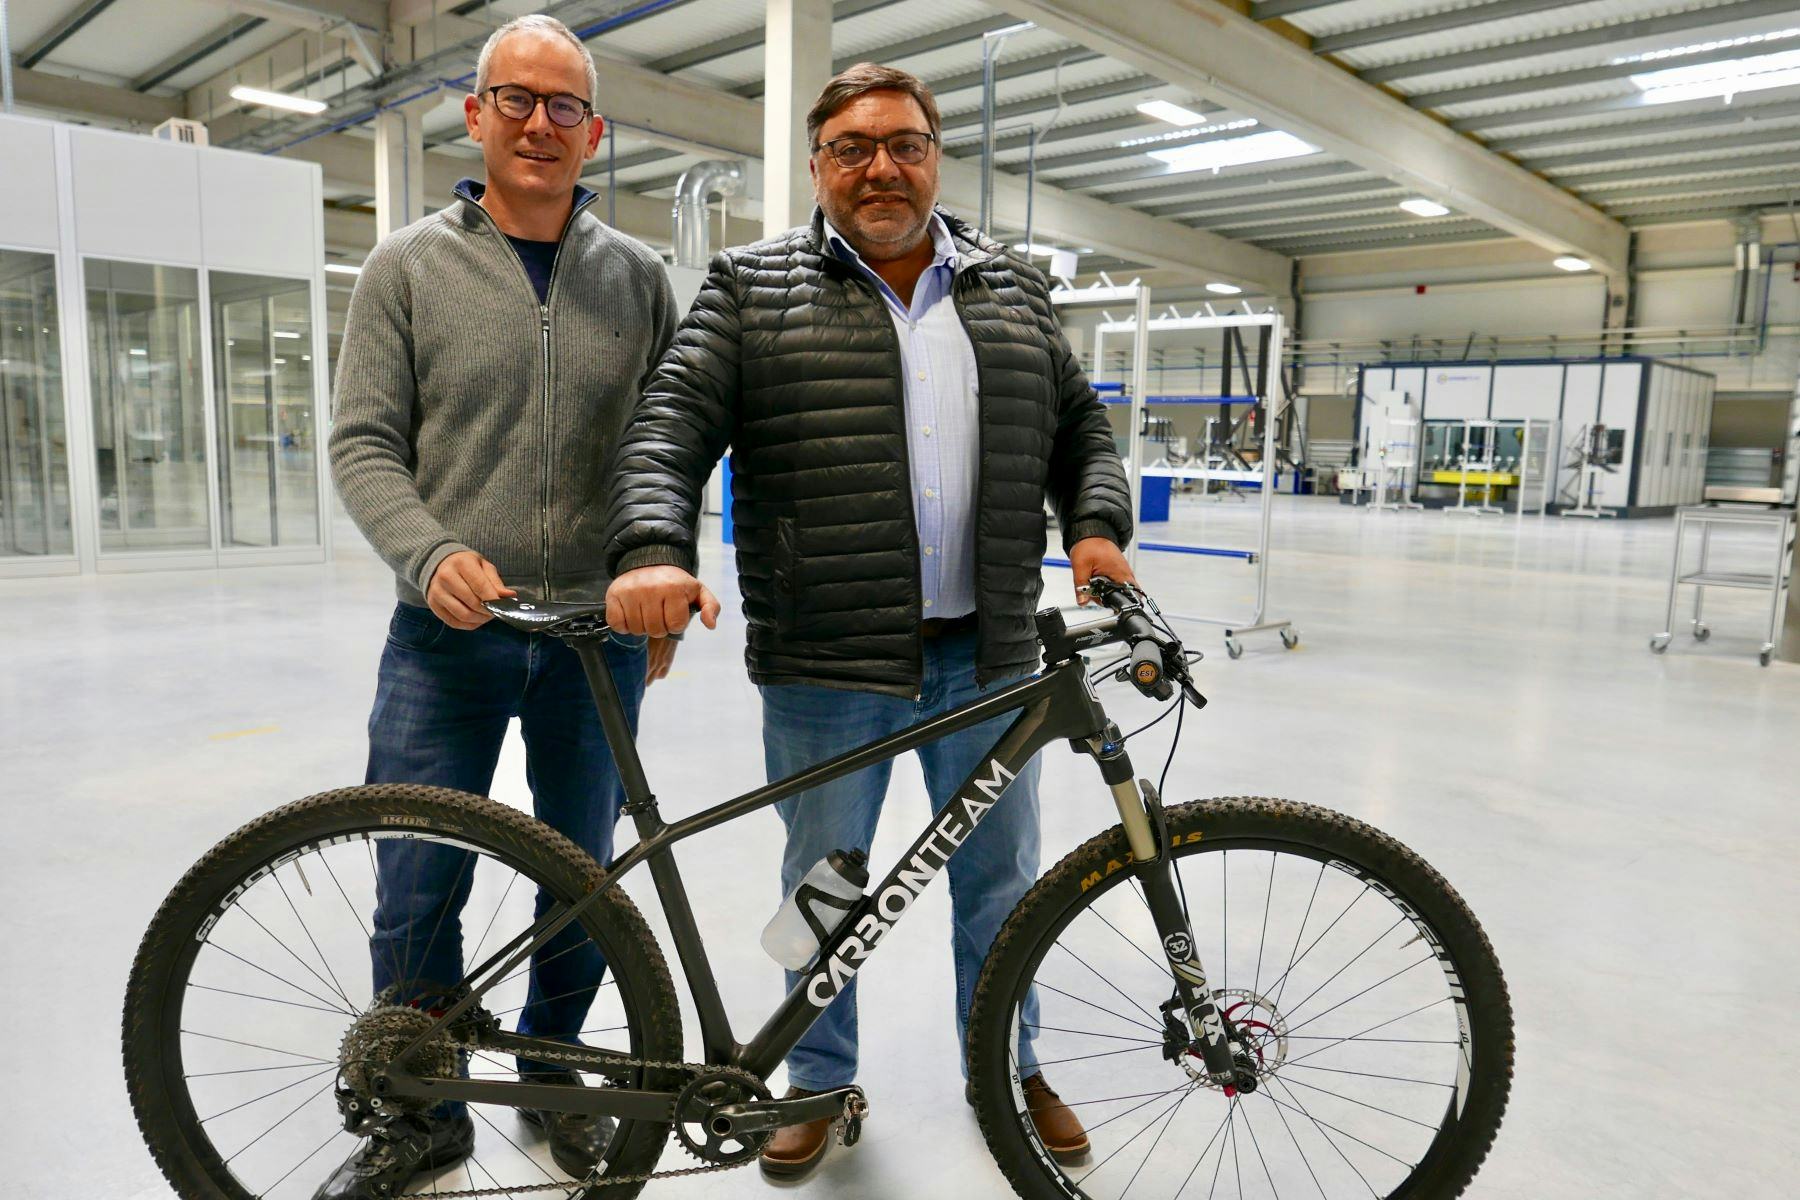 A first hardtail full carbon frame from Carbon Team manufacturing - proudly presented by General Manager Emre Ozgunes (left) with Ciclo Fapril General Manager and Carbon Team shareholder Vital Almeida. - Photo Jo Beckendorrff